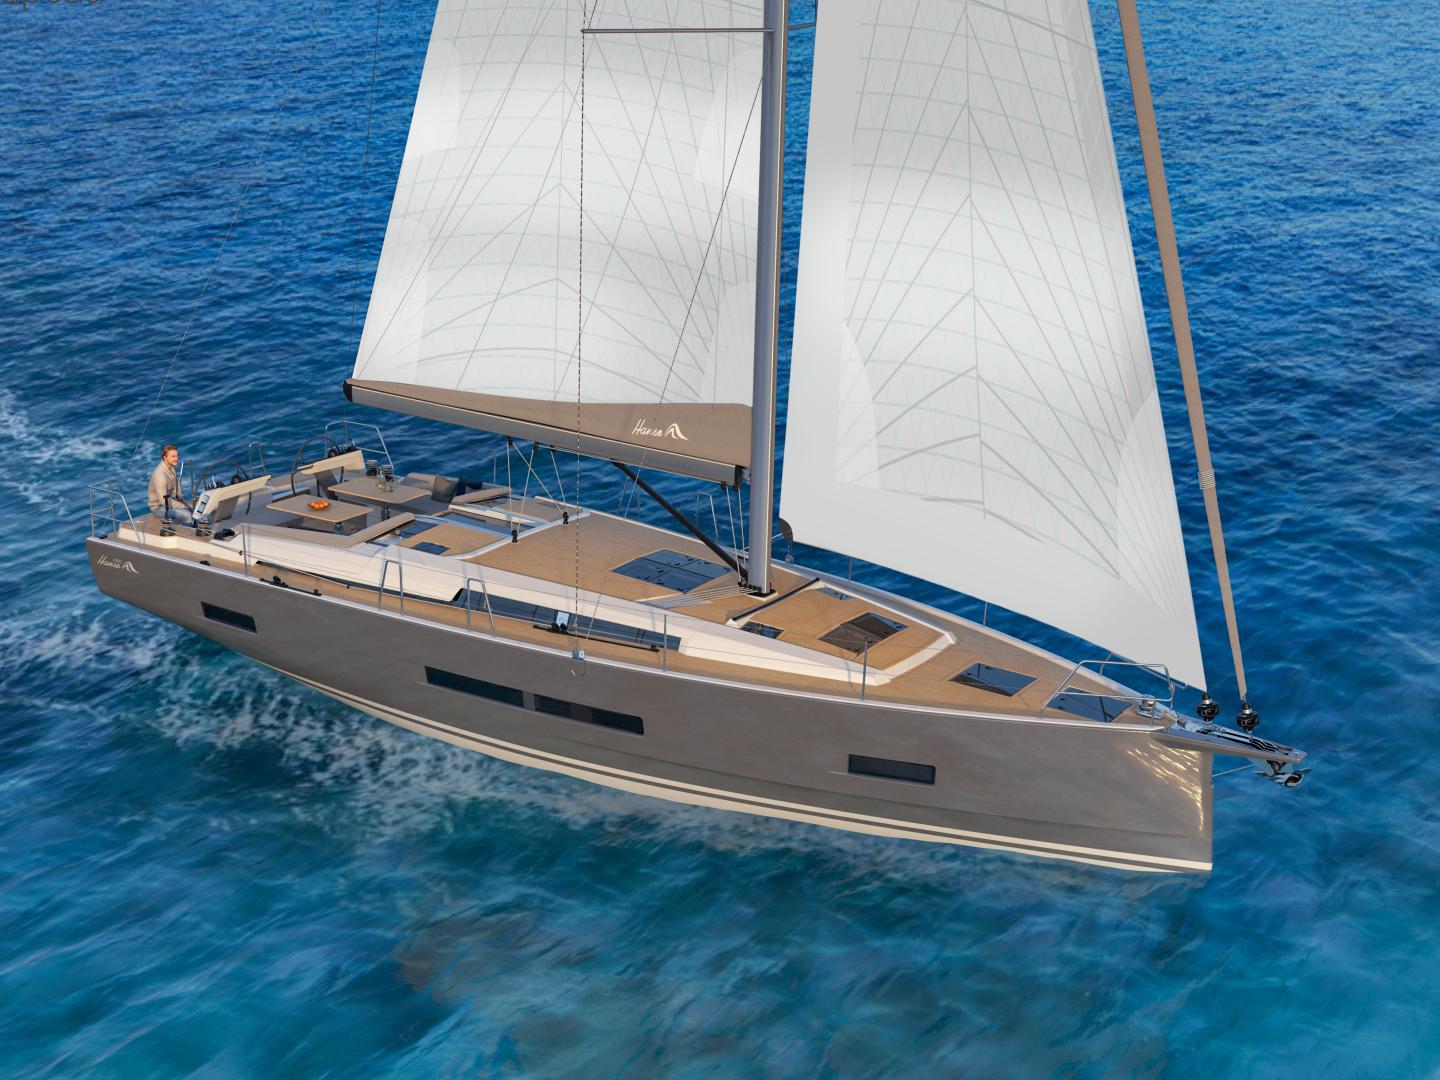 The Hanse 460 marks the launch of a new model range